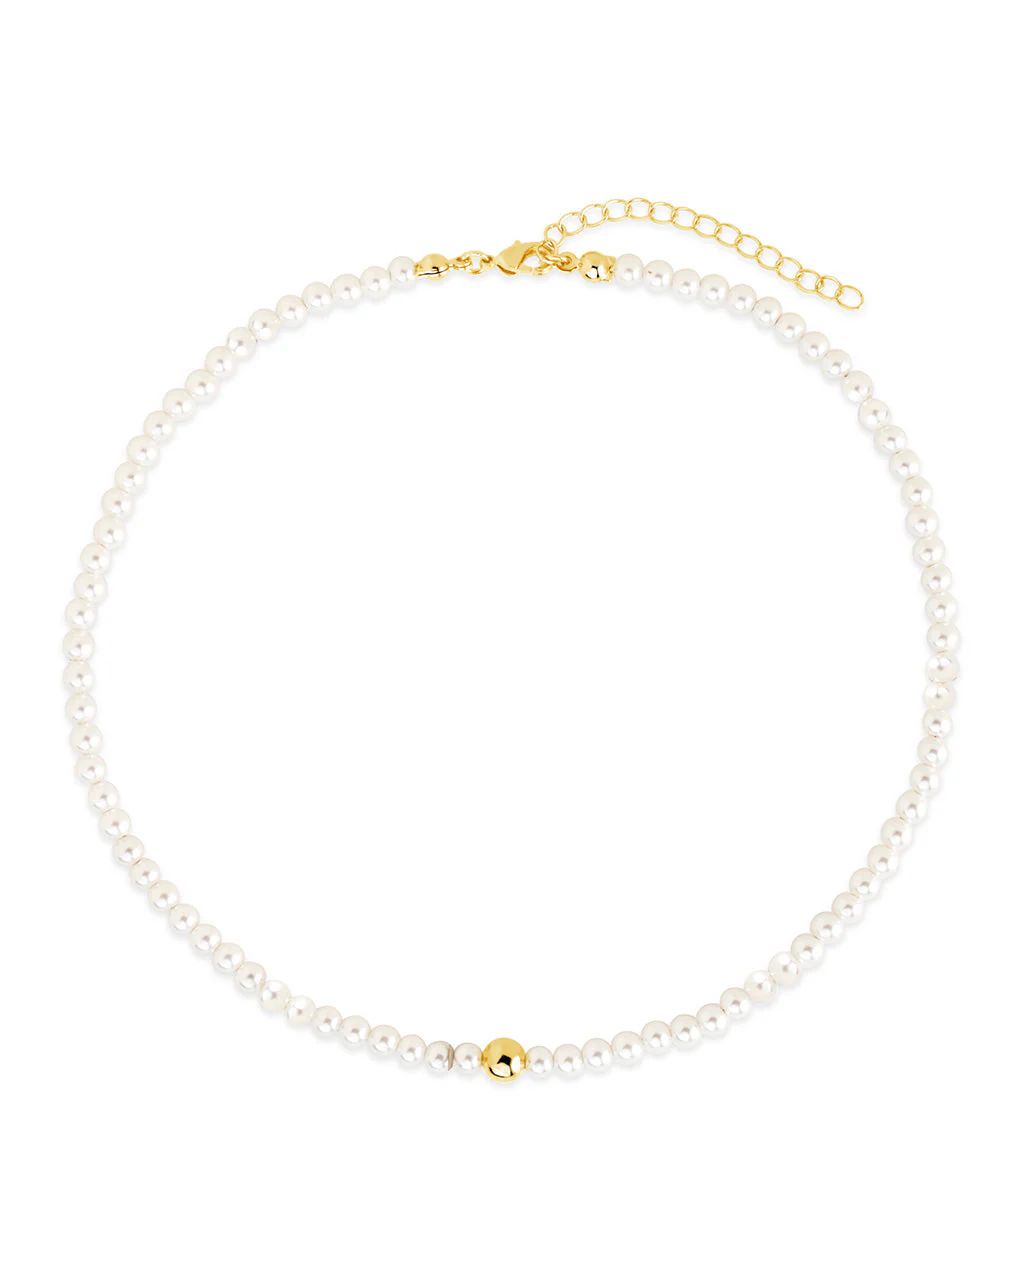 Dainty Pearl & Polished Bead Choker Necklace | Sterling Forever